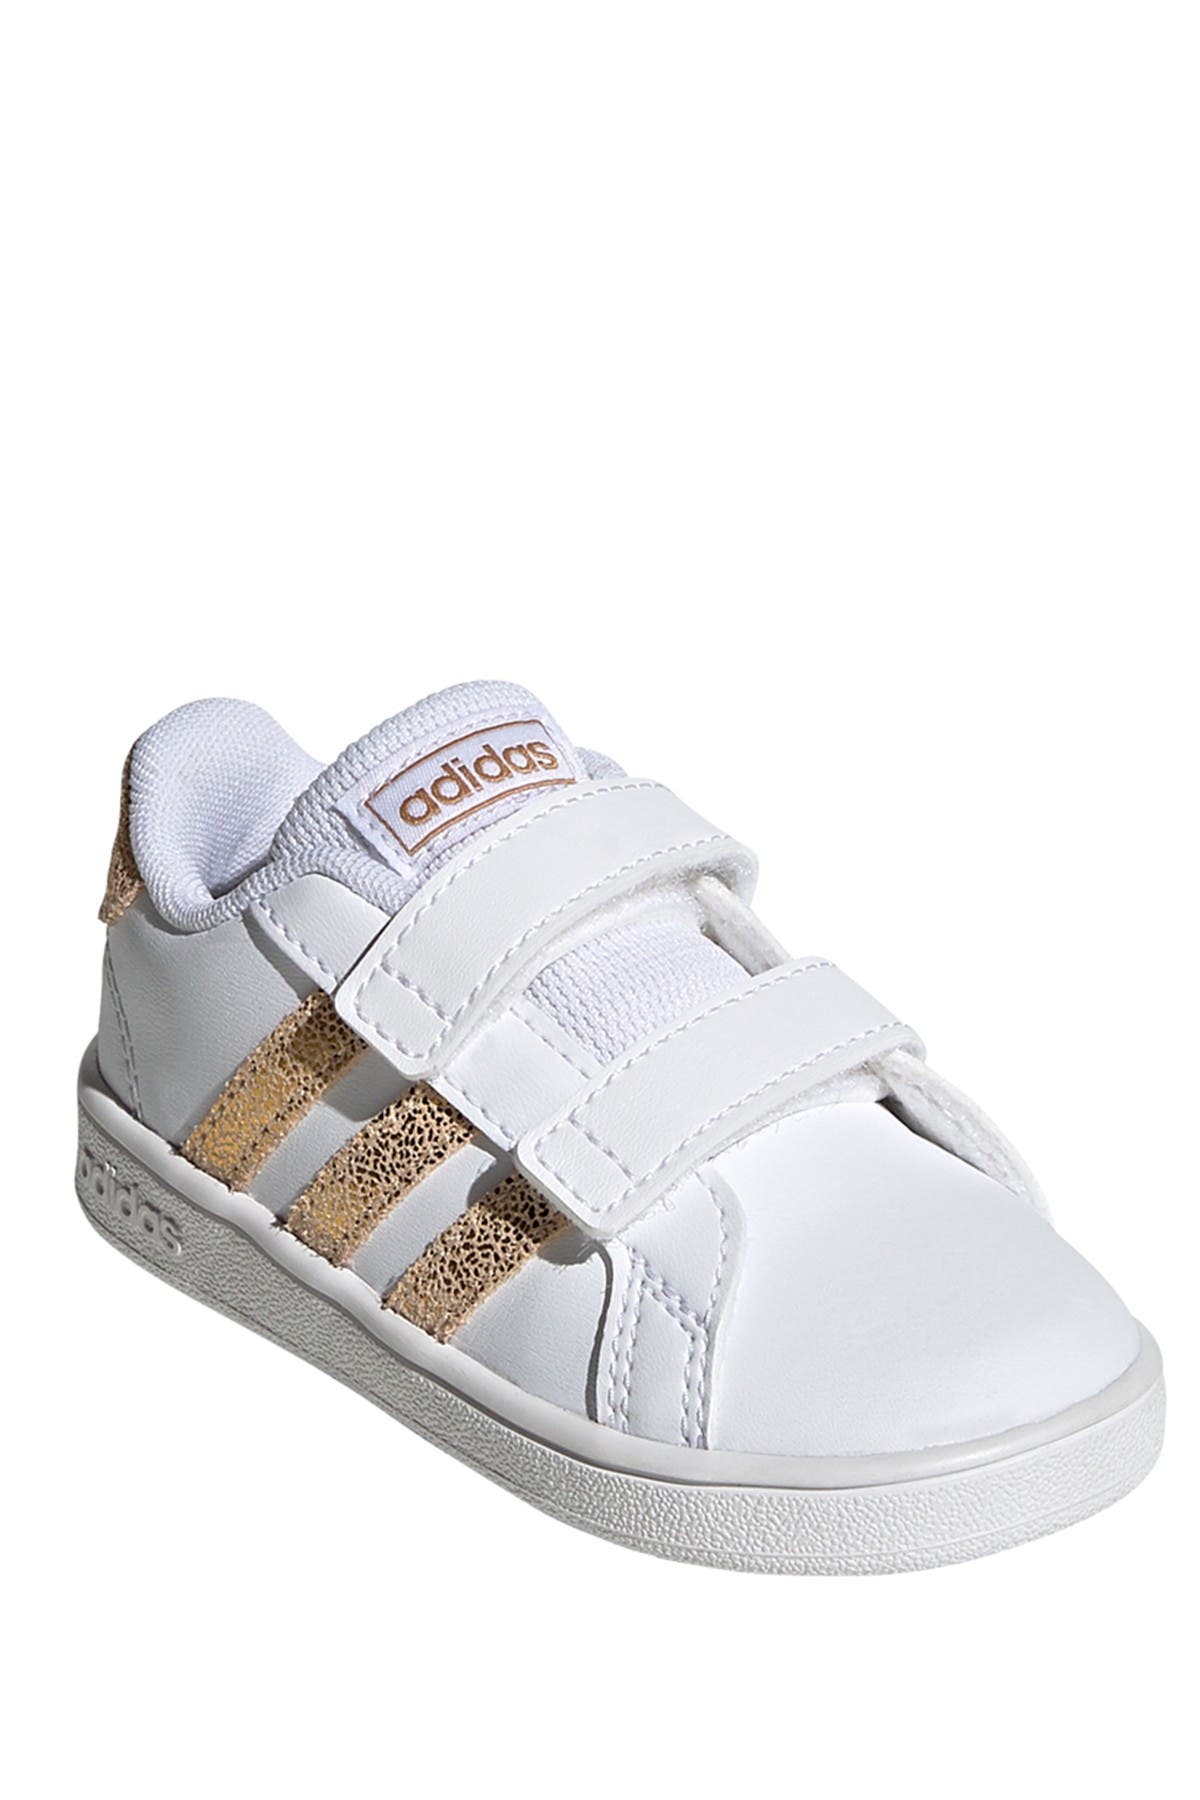 adidas kids shoes for girls